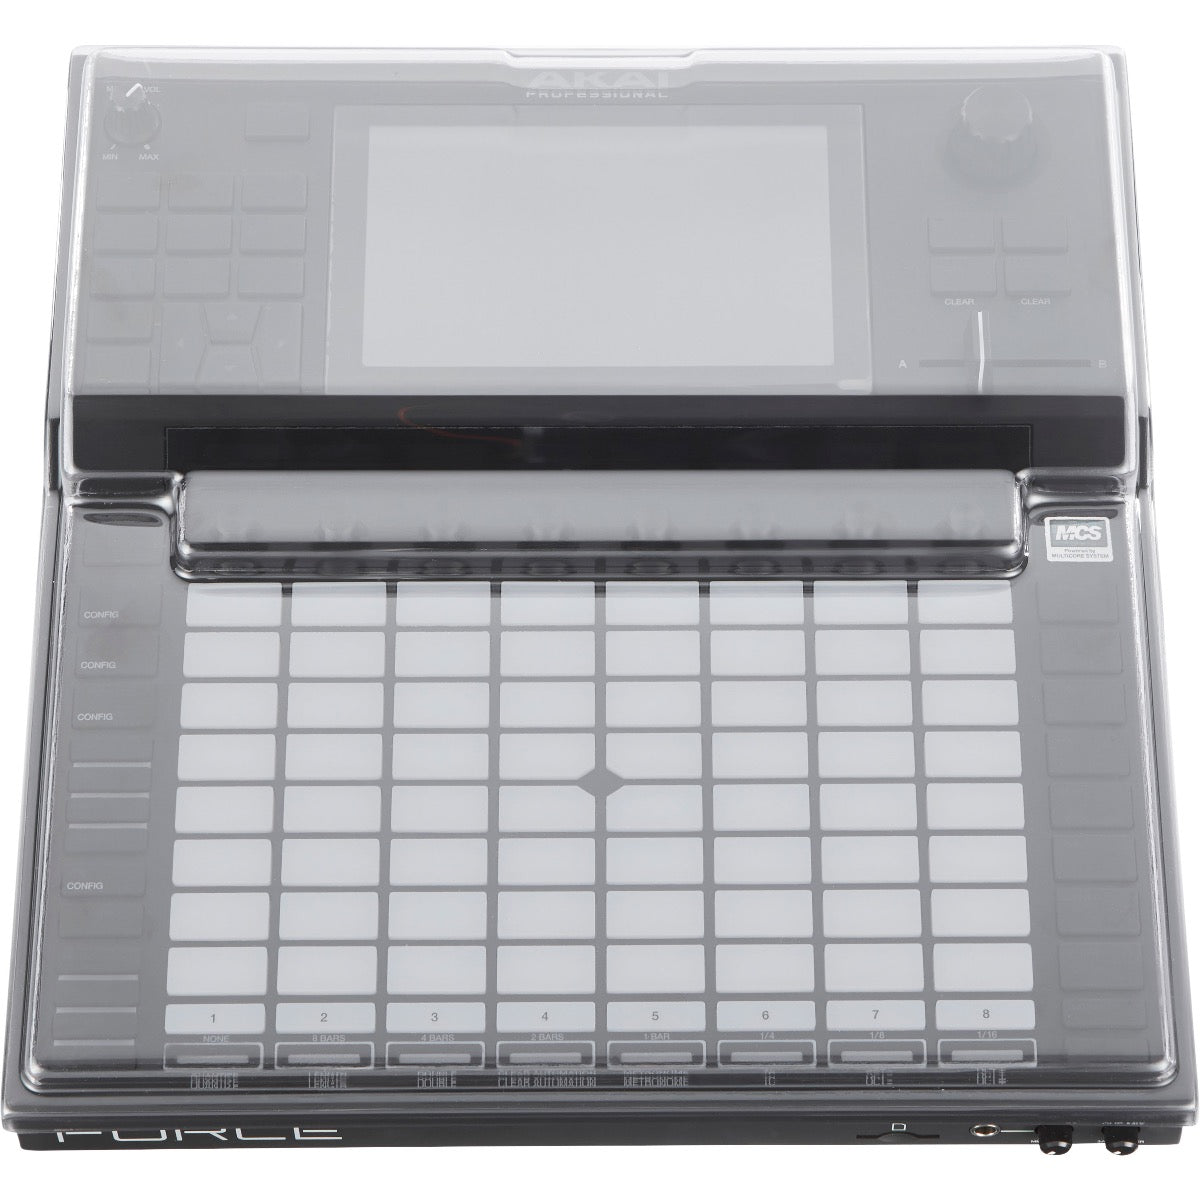 Perspective view of Decksaver Akai Professional Force Cover fitted onto Akai Professional Force (sold separately) showing top and front